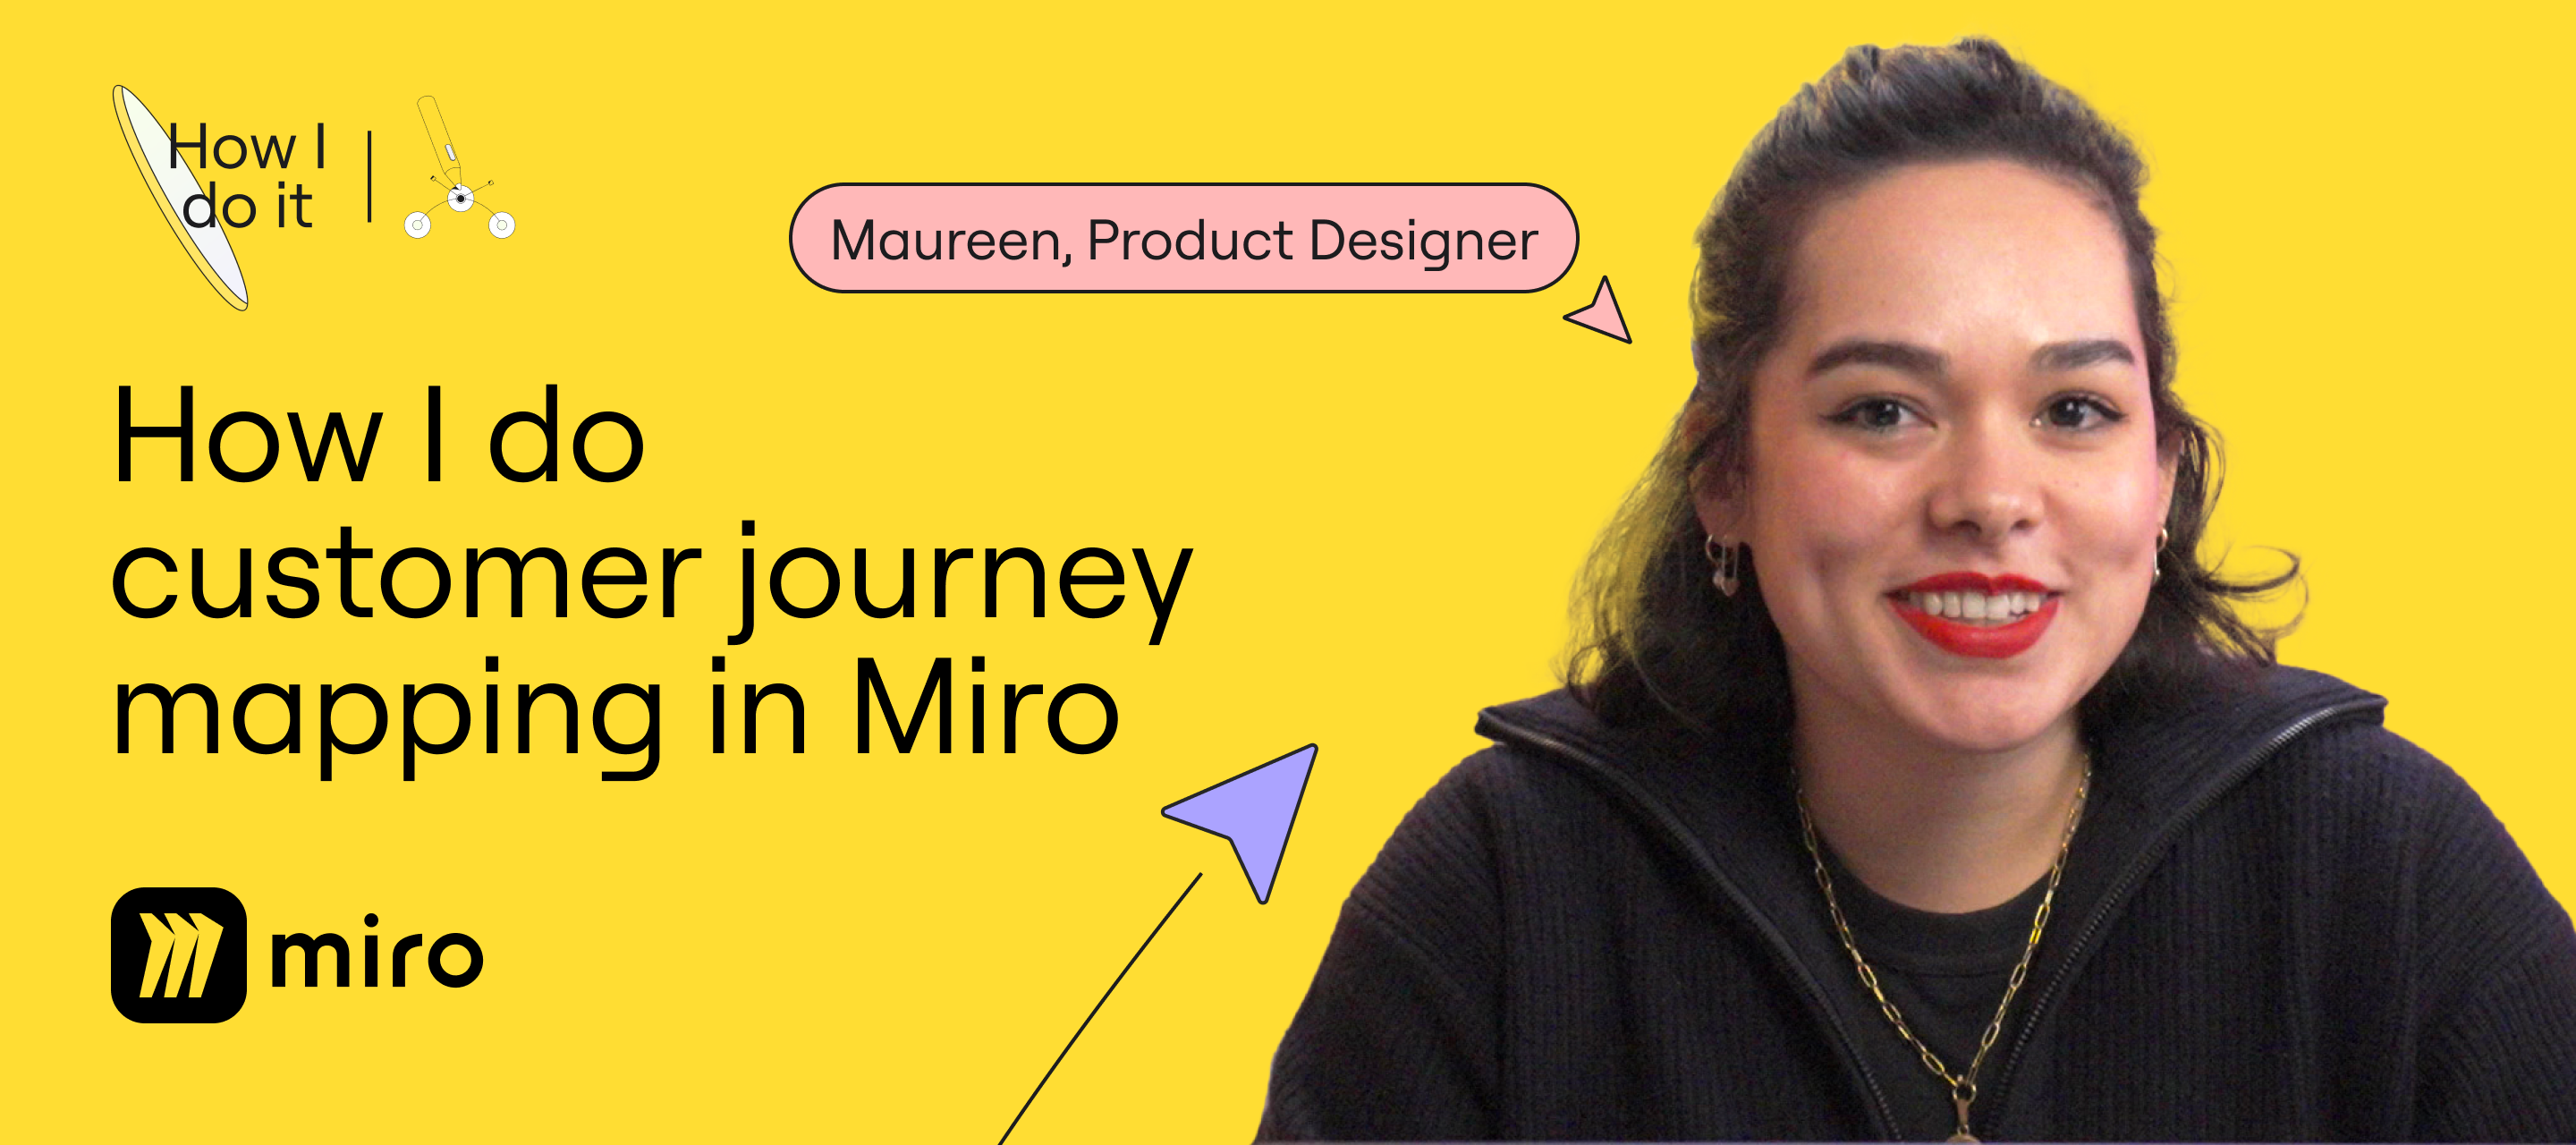 Learn: “How I do Customer Journey Mapping in Miro” with Maureen